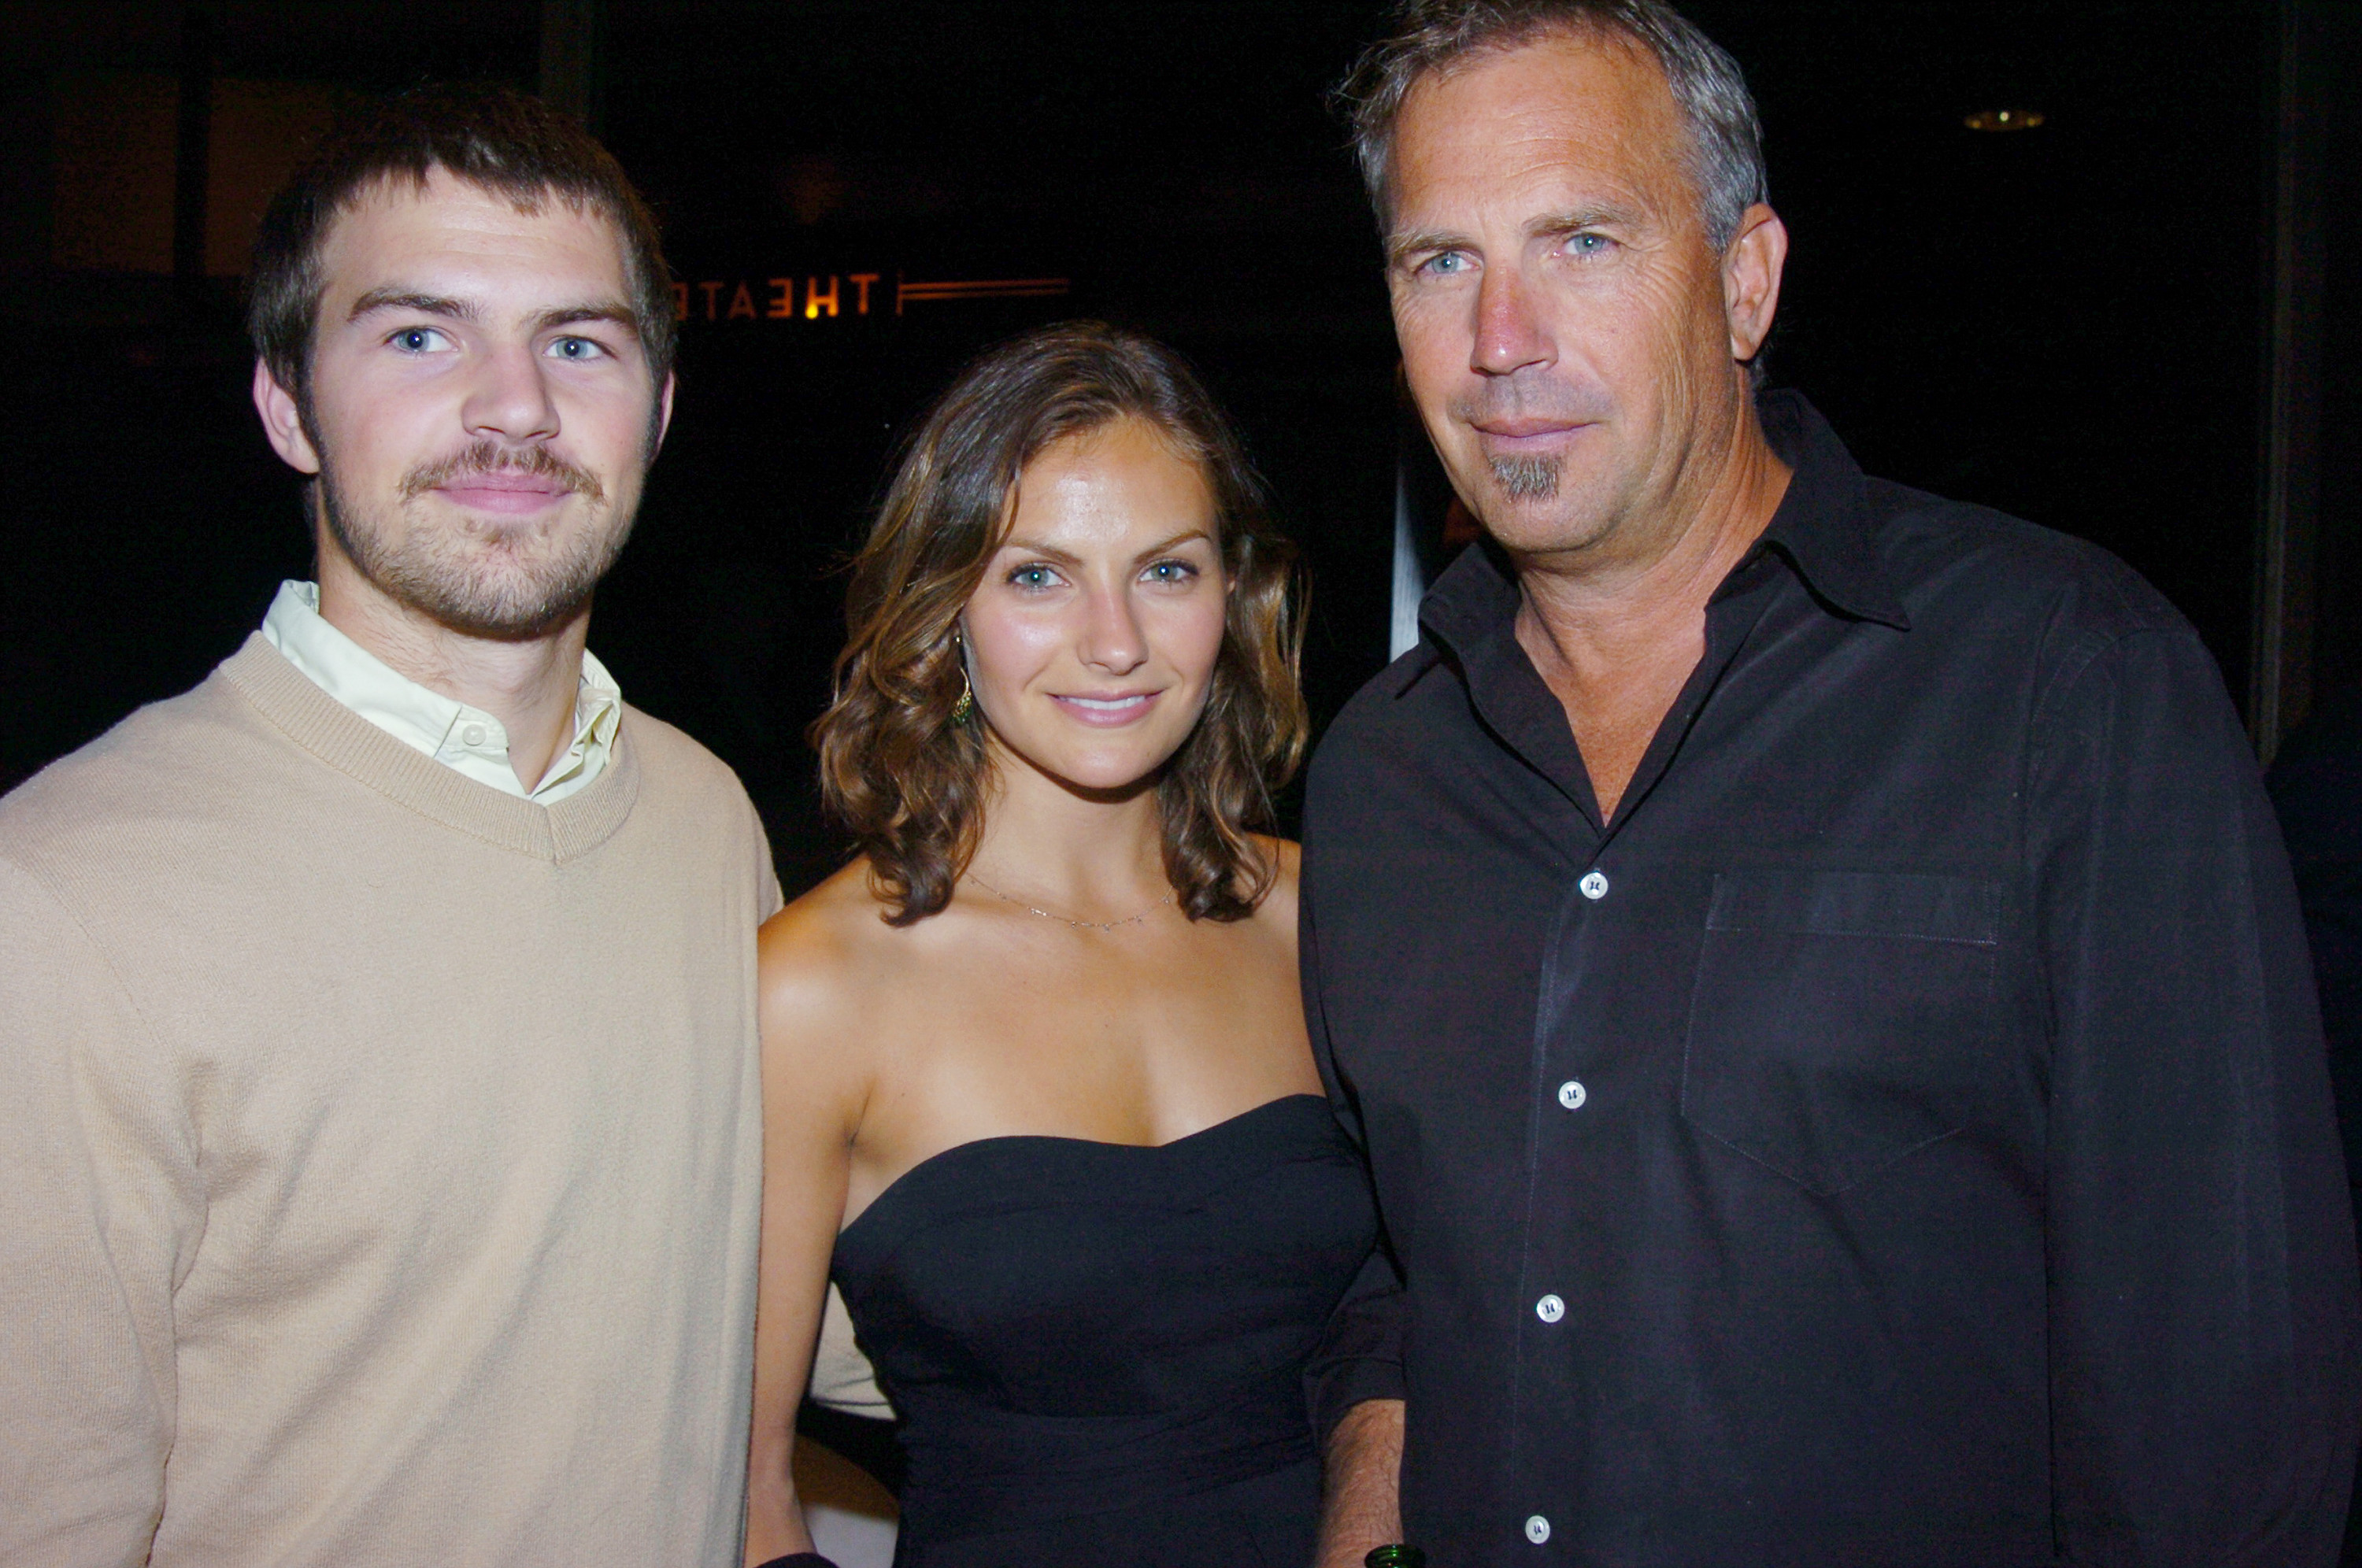 Joe, Annie, and Kevin Costner at the "Mr. Brooks" special screening in 2007. | Source: Getty Images